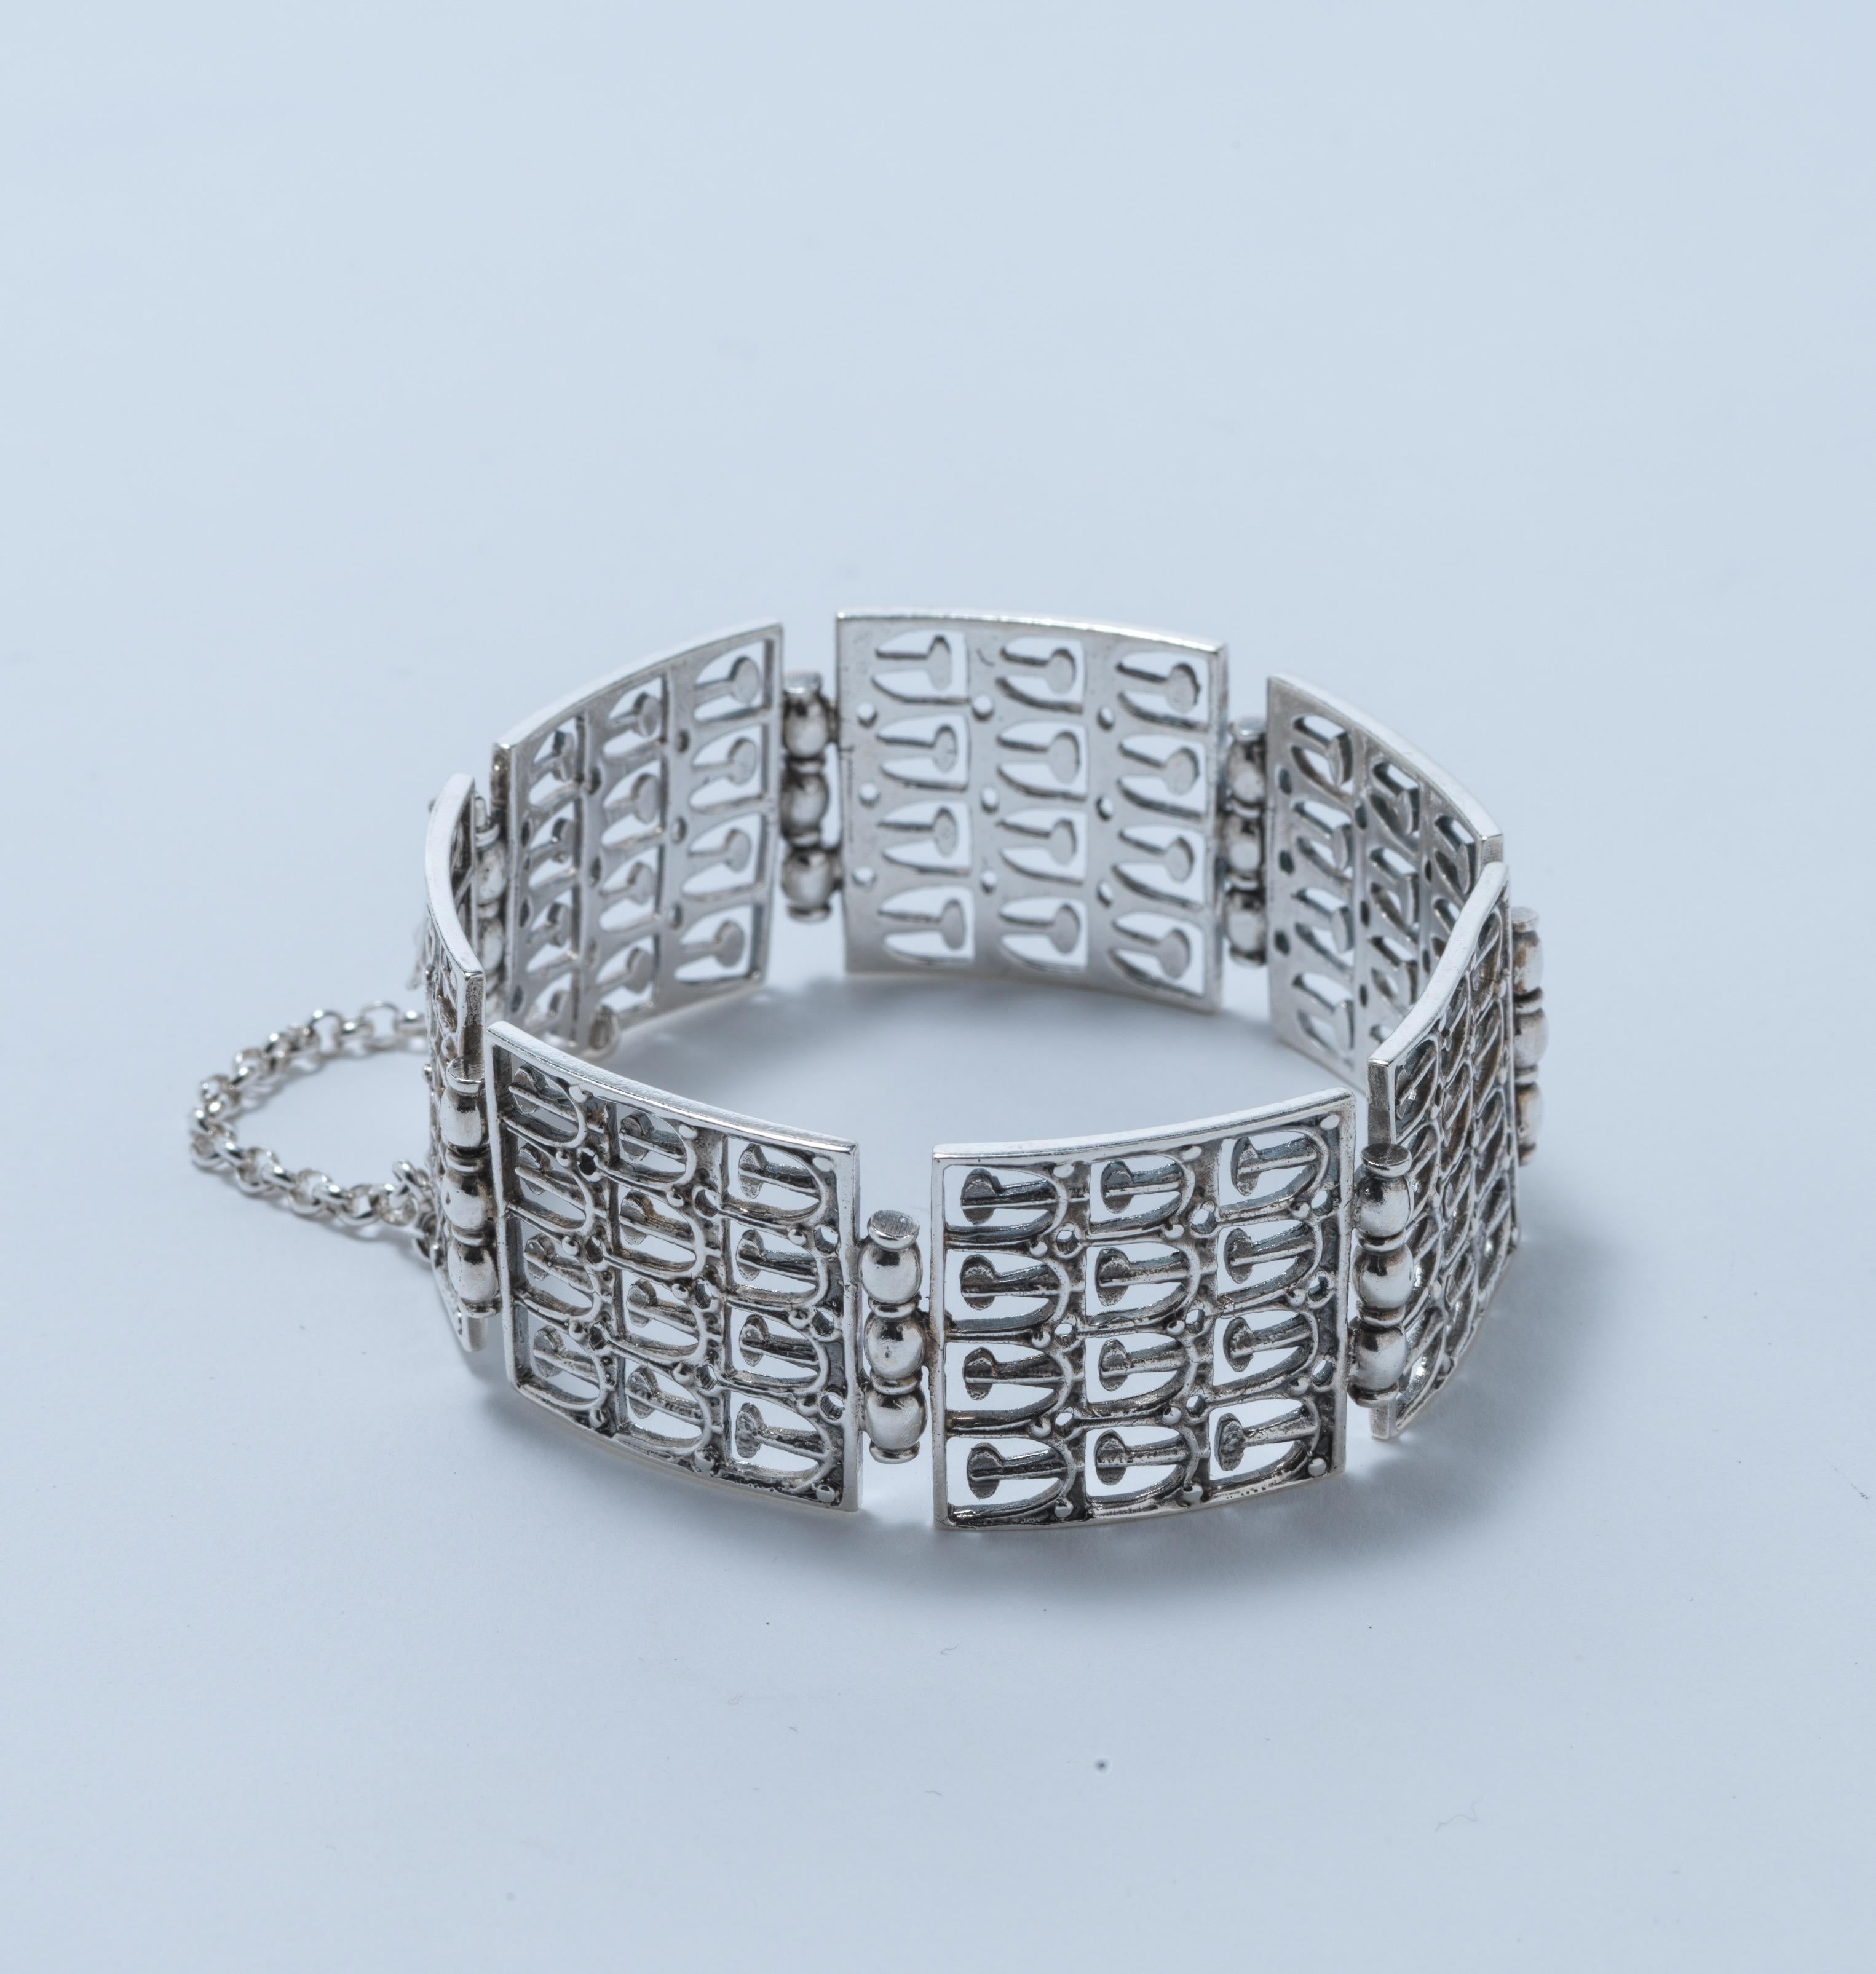 This 1970s Finnish bracelet is so typical Finnish and typical 70s. Its design is simple but yet refined. It suits both younger and older persons. A piece of art to be worn.
Made of sterling silver in 1975. 
